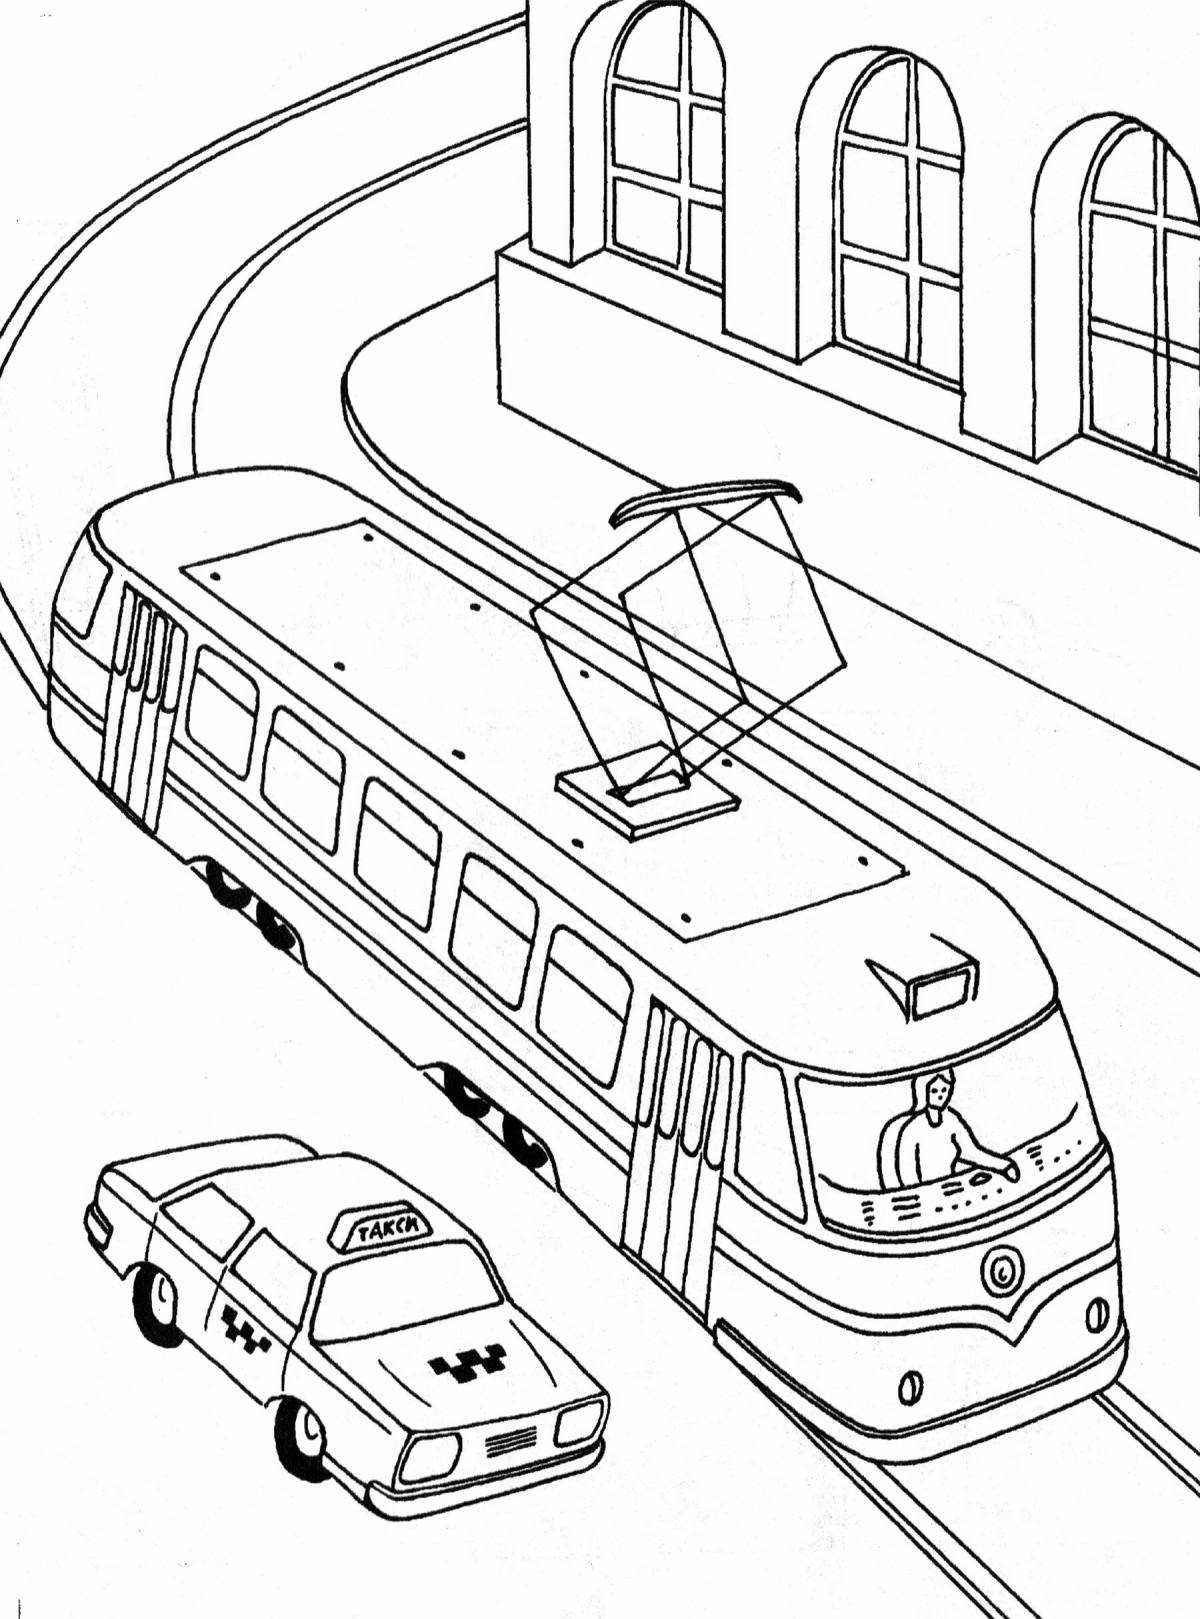 Adorable tram coloring book for kids